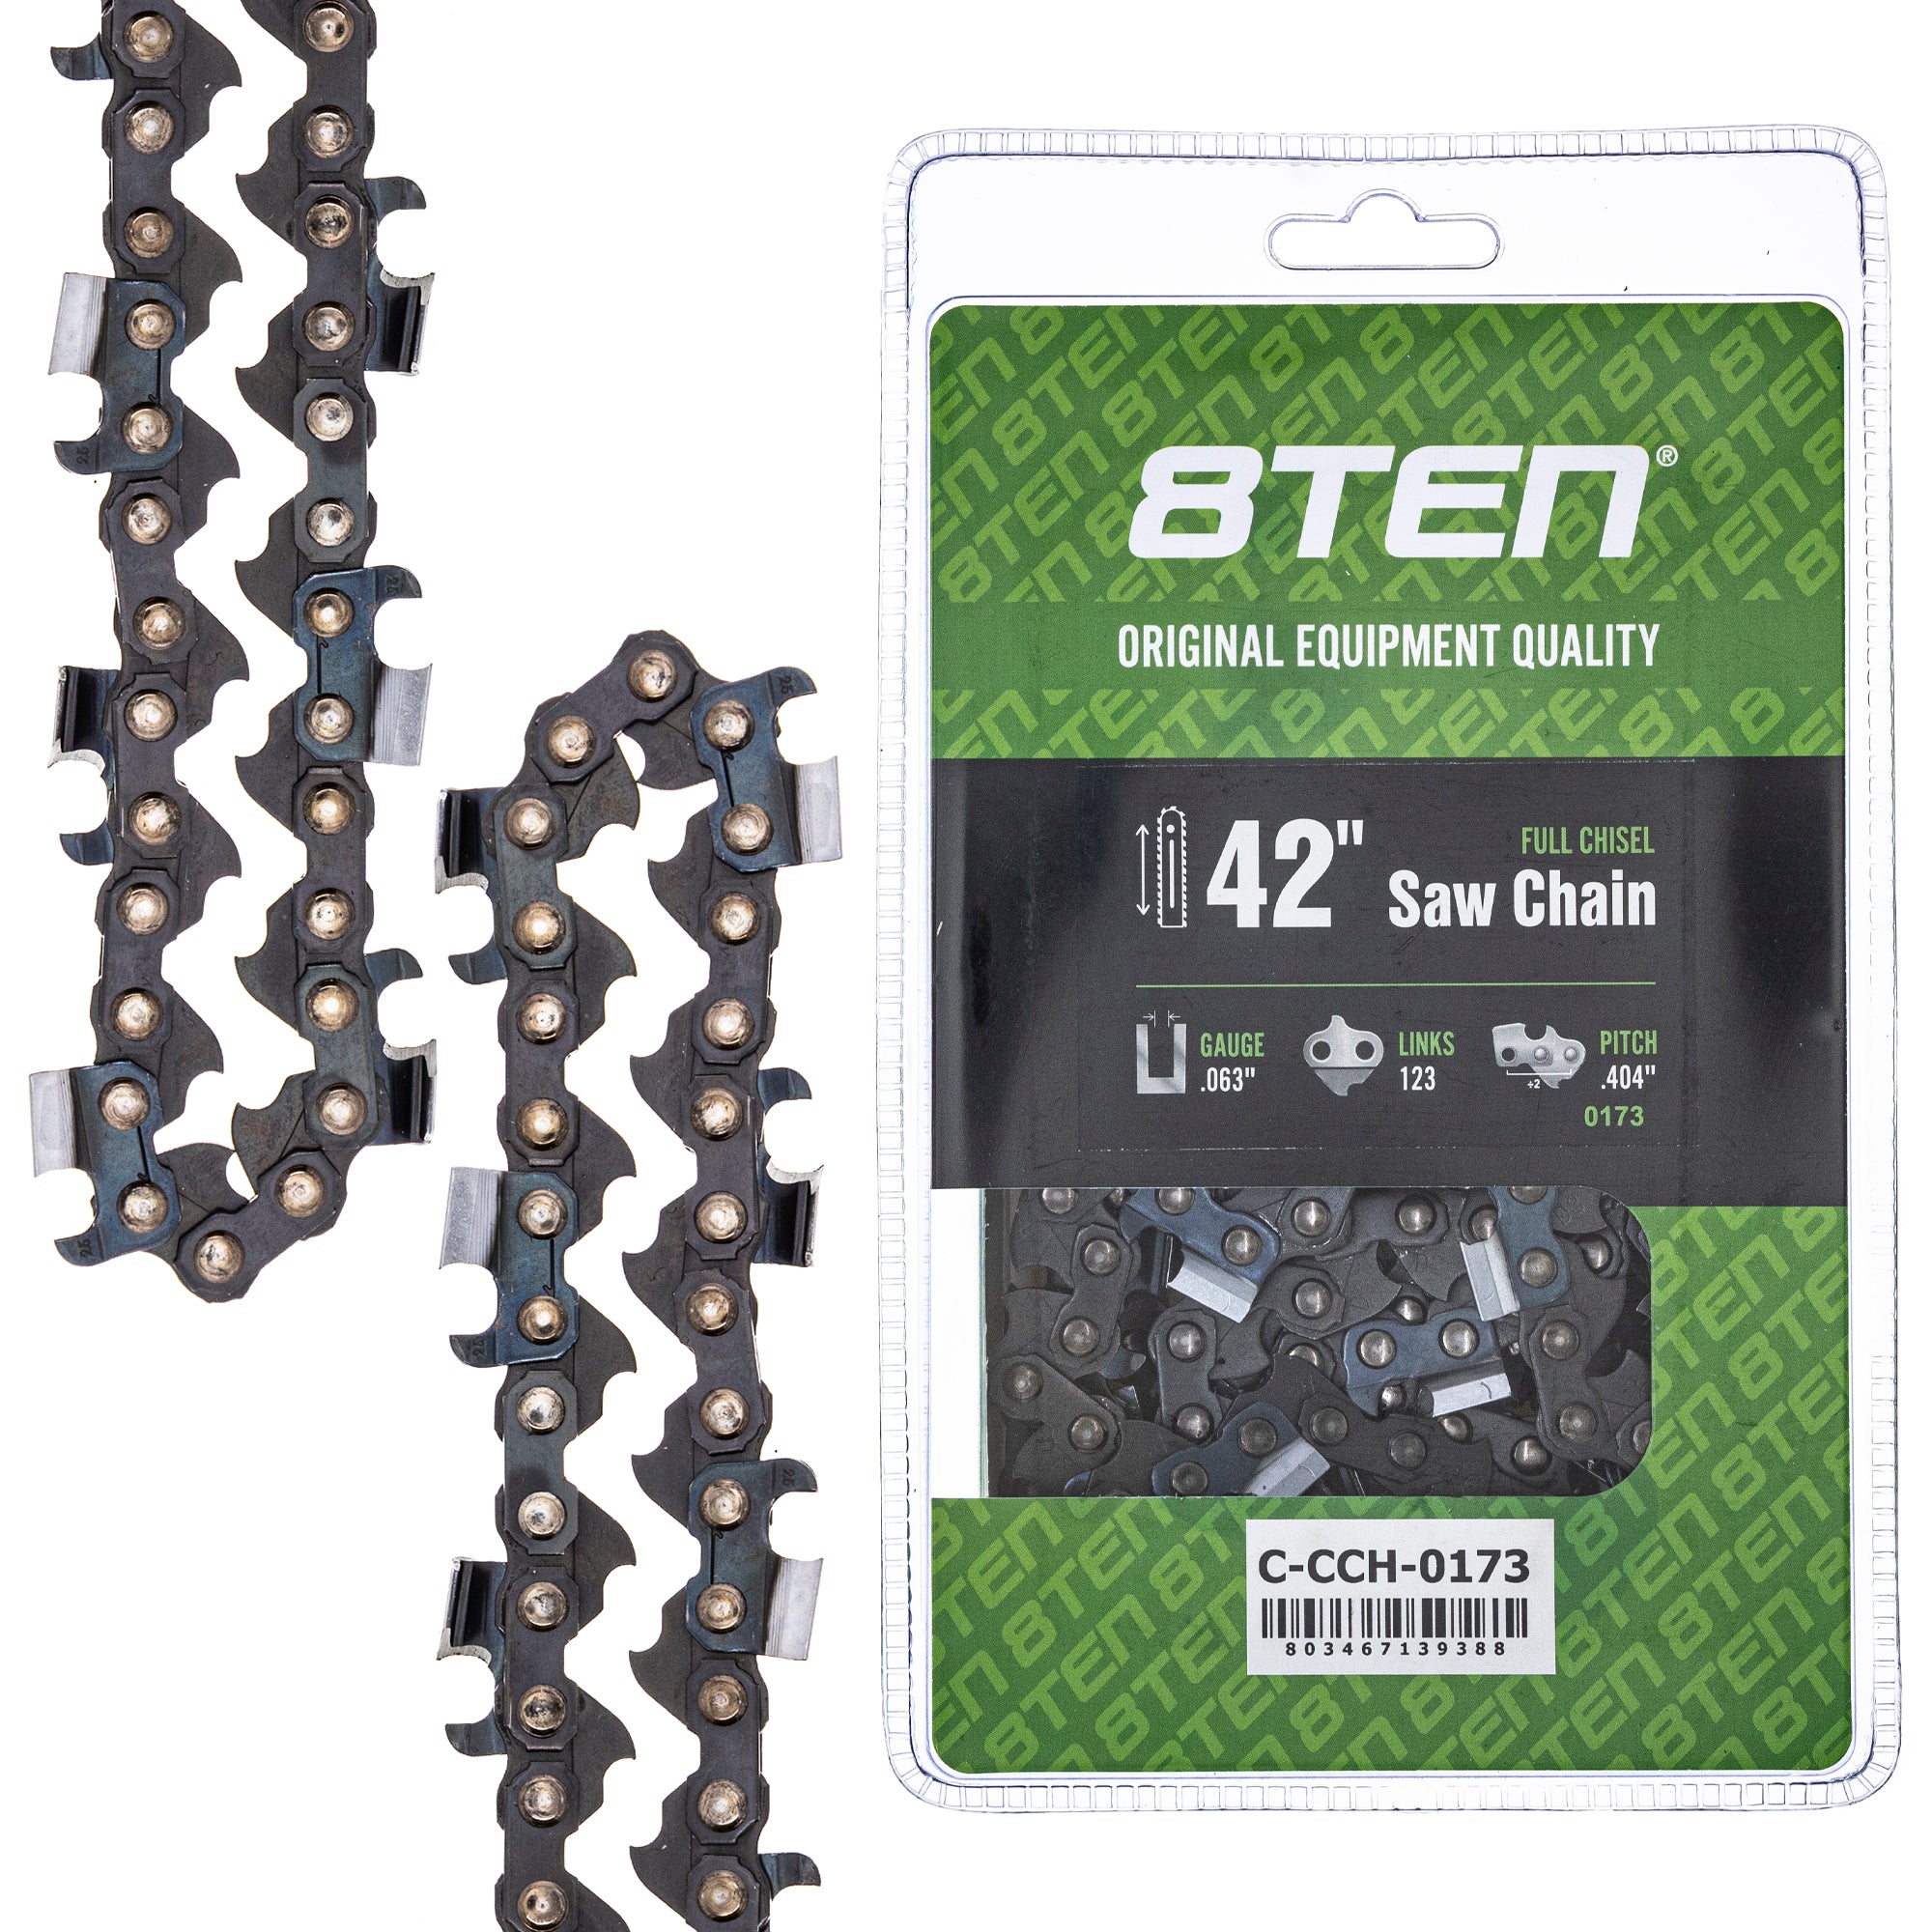 Chainsaw Chain 42 Inch .063 .404 123DL for zOTHER MS 088 084 8TEN 810-CCC2395H